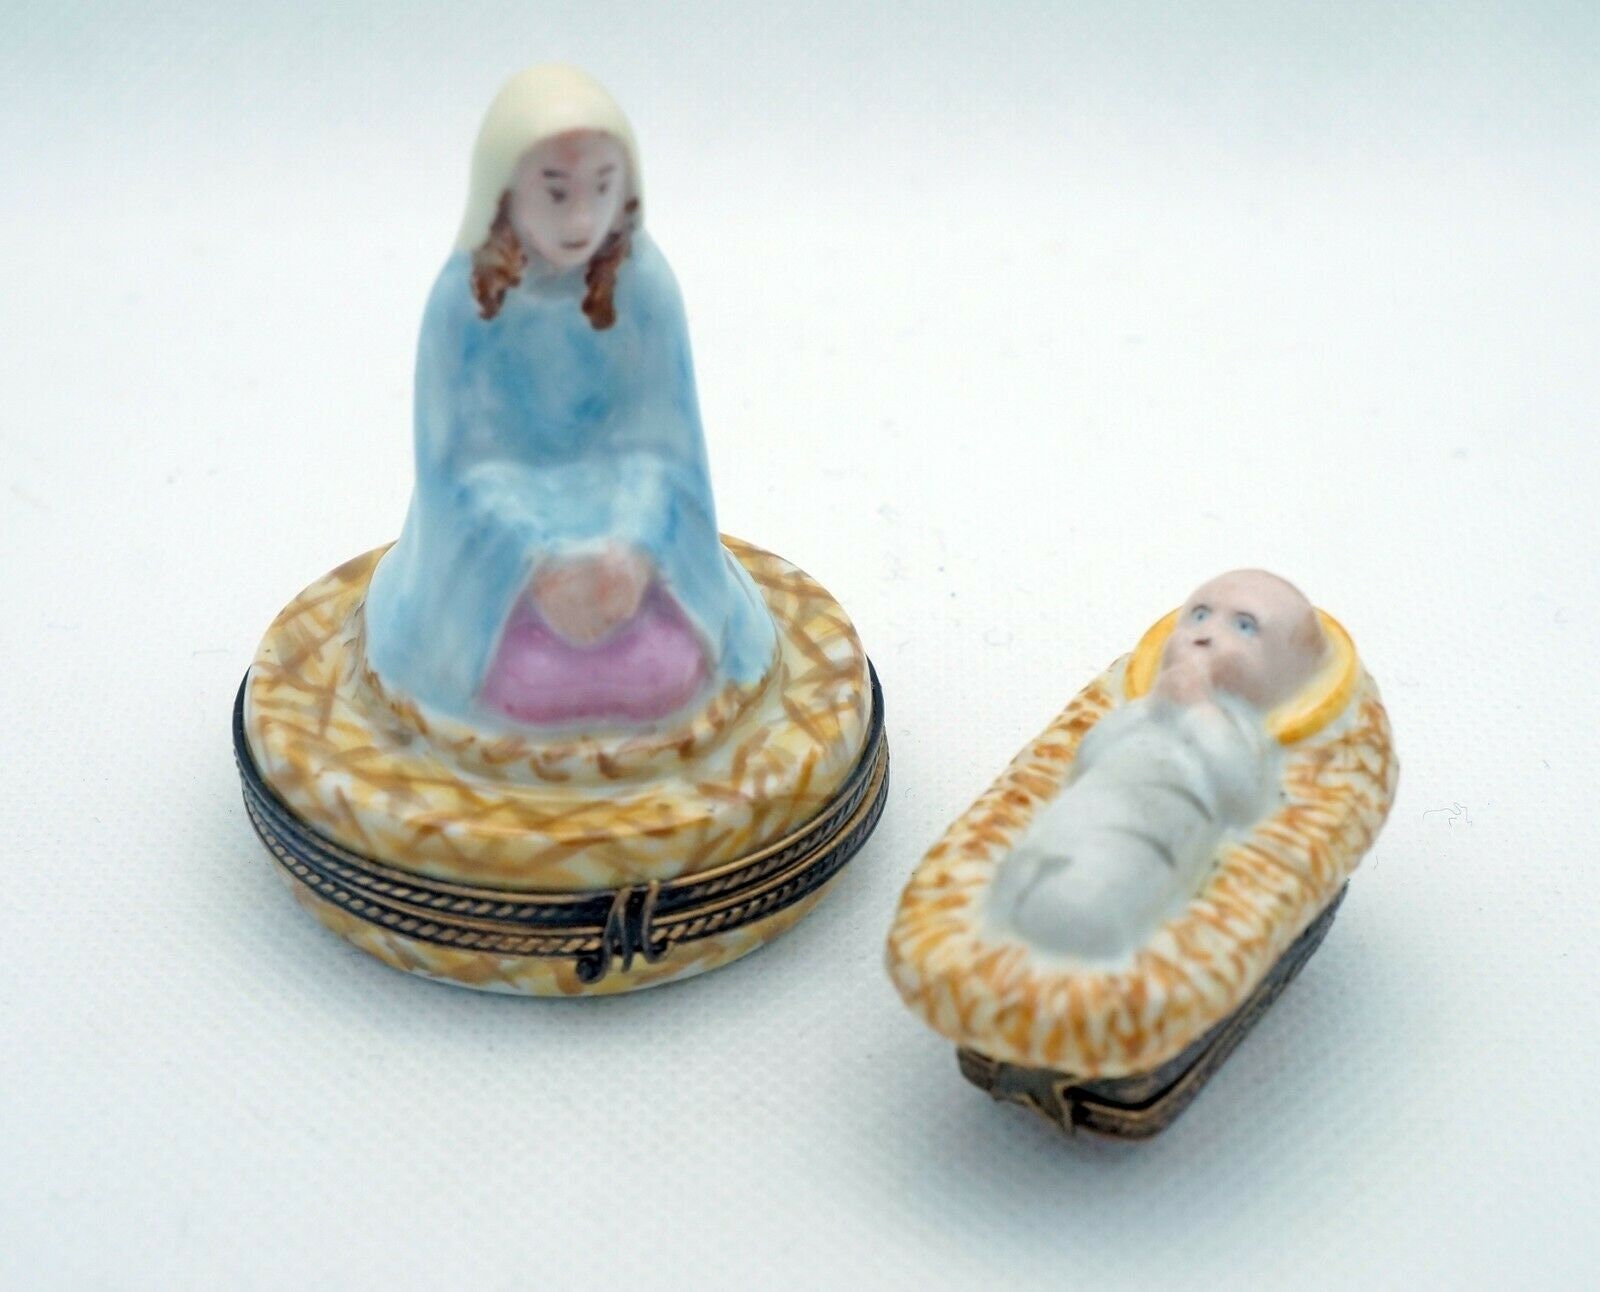 Authentic Hand-Painted Limoges Mary Trinket Box